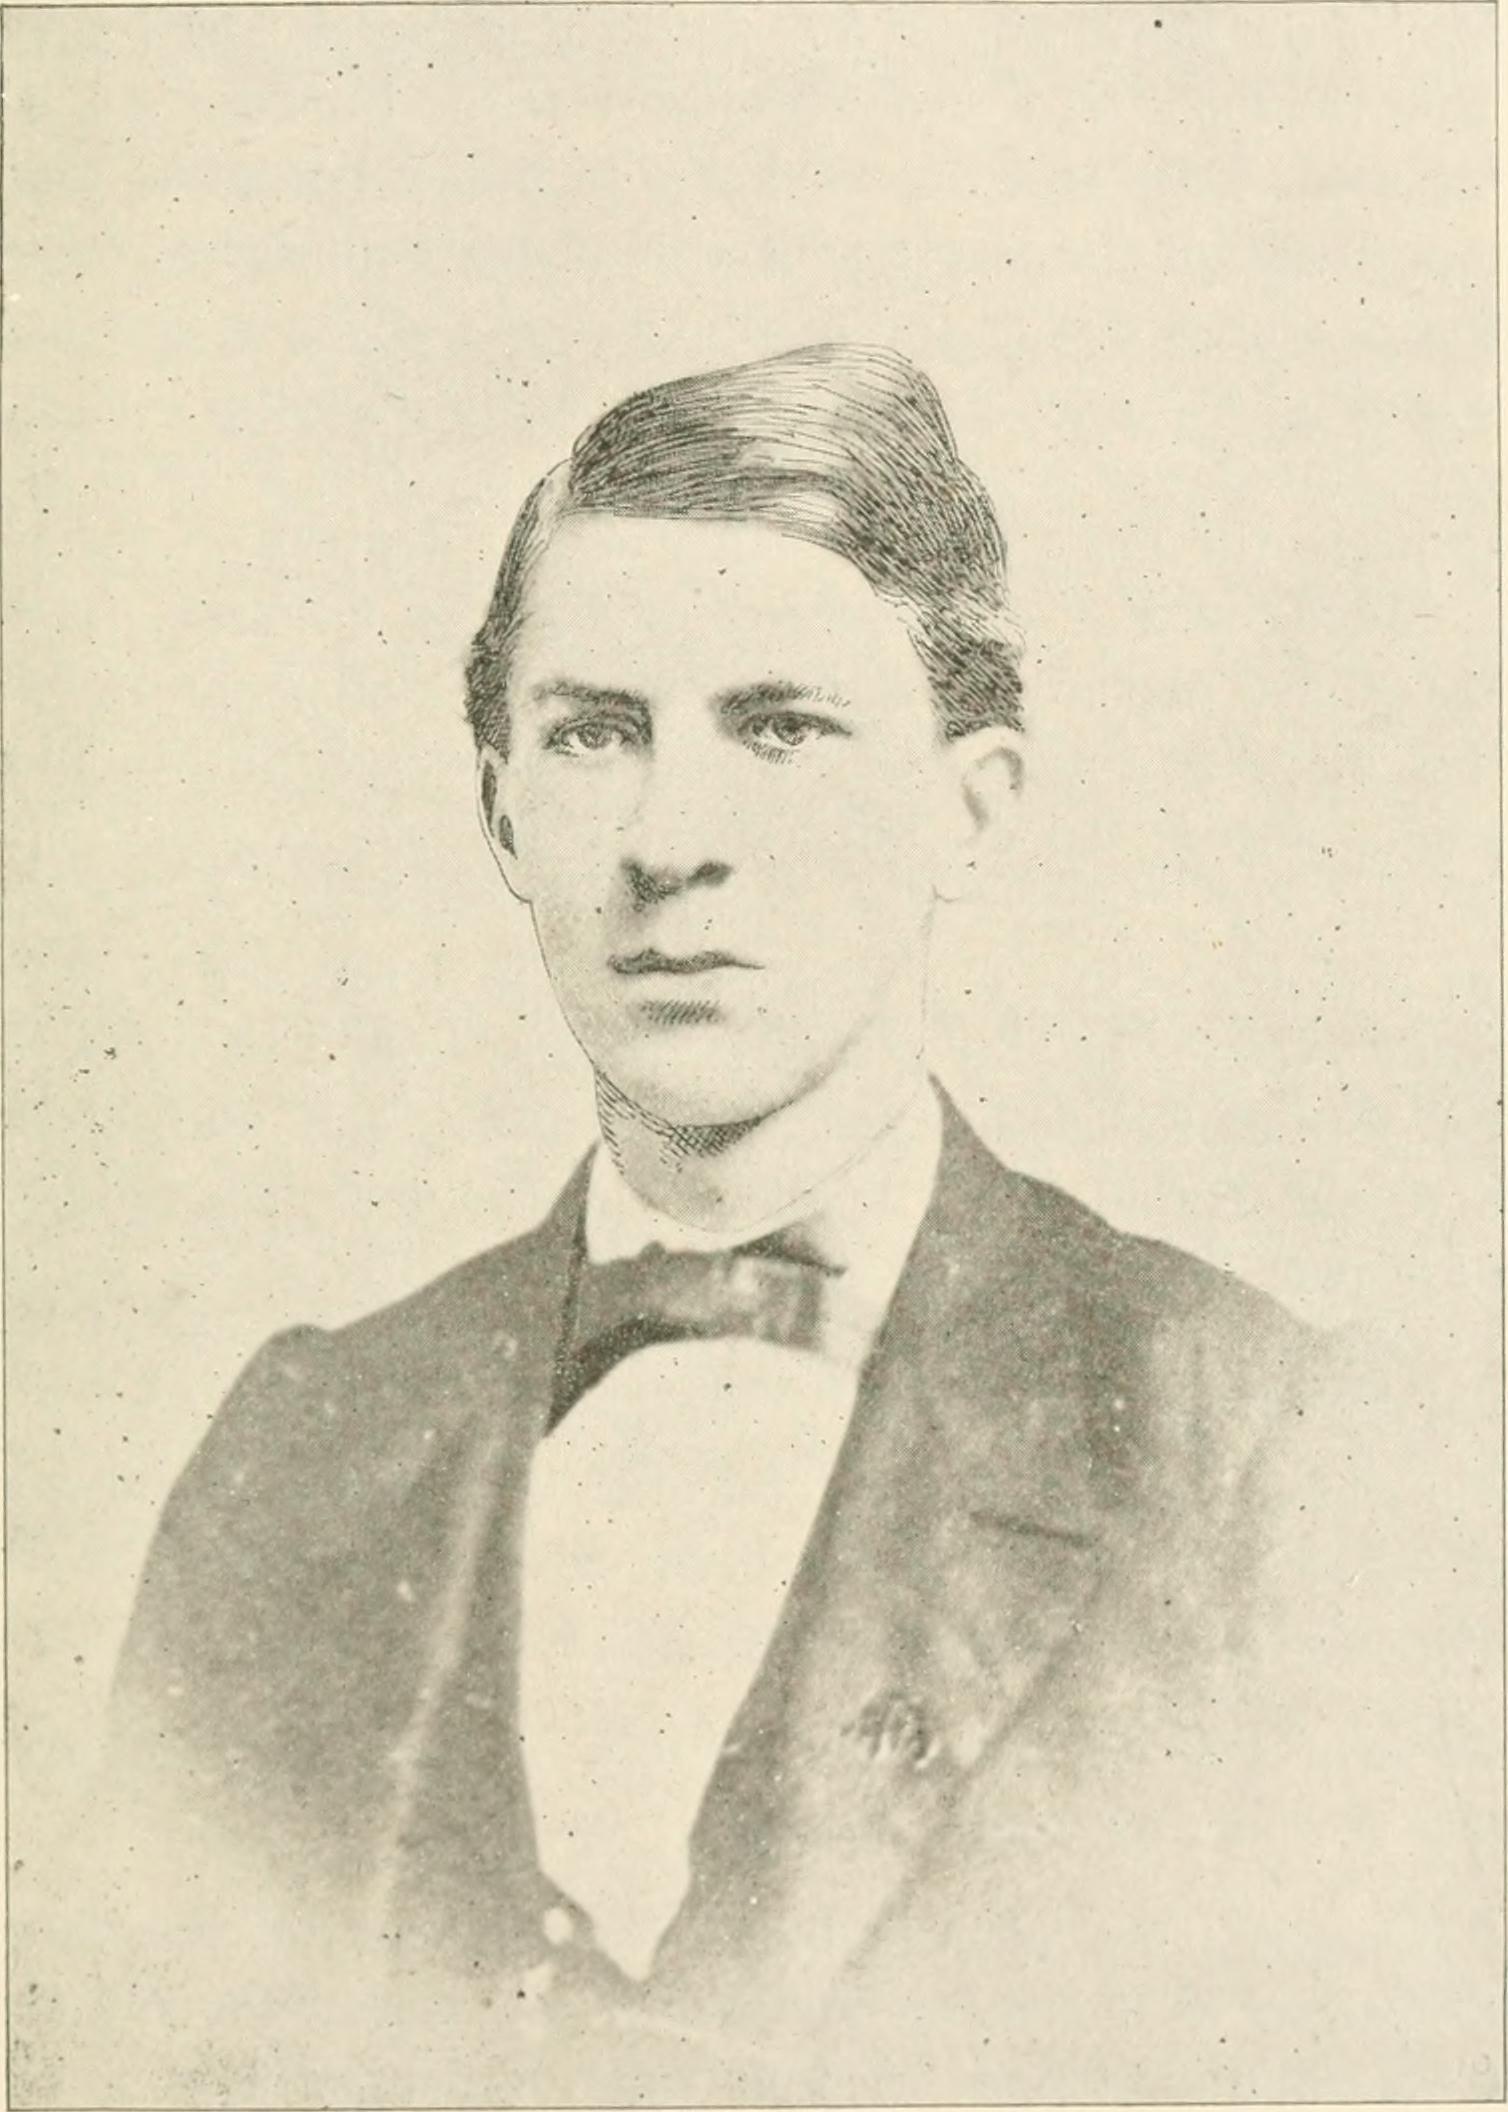 Image from page 340 of "Bull run to Bull run; or, Four years in the army of northern Virginia. Containing a detailed account of the career and adventures of the Baylor Light Horse, Company B., Twelfth Virginia Cavalry, C. S. A., with leaves from my scrap-